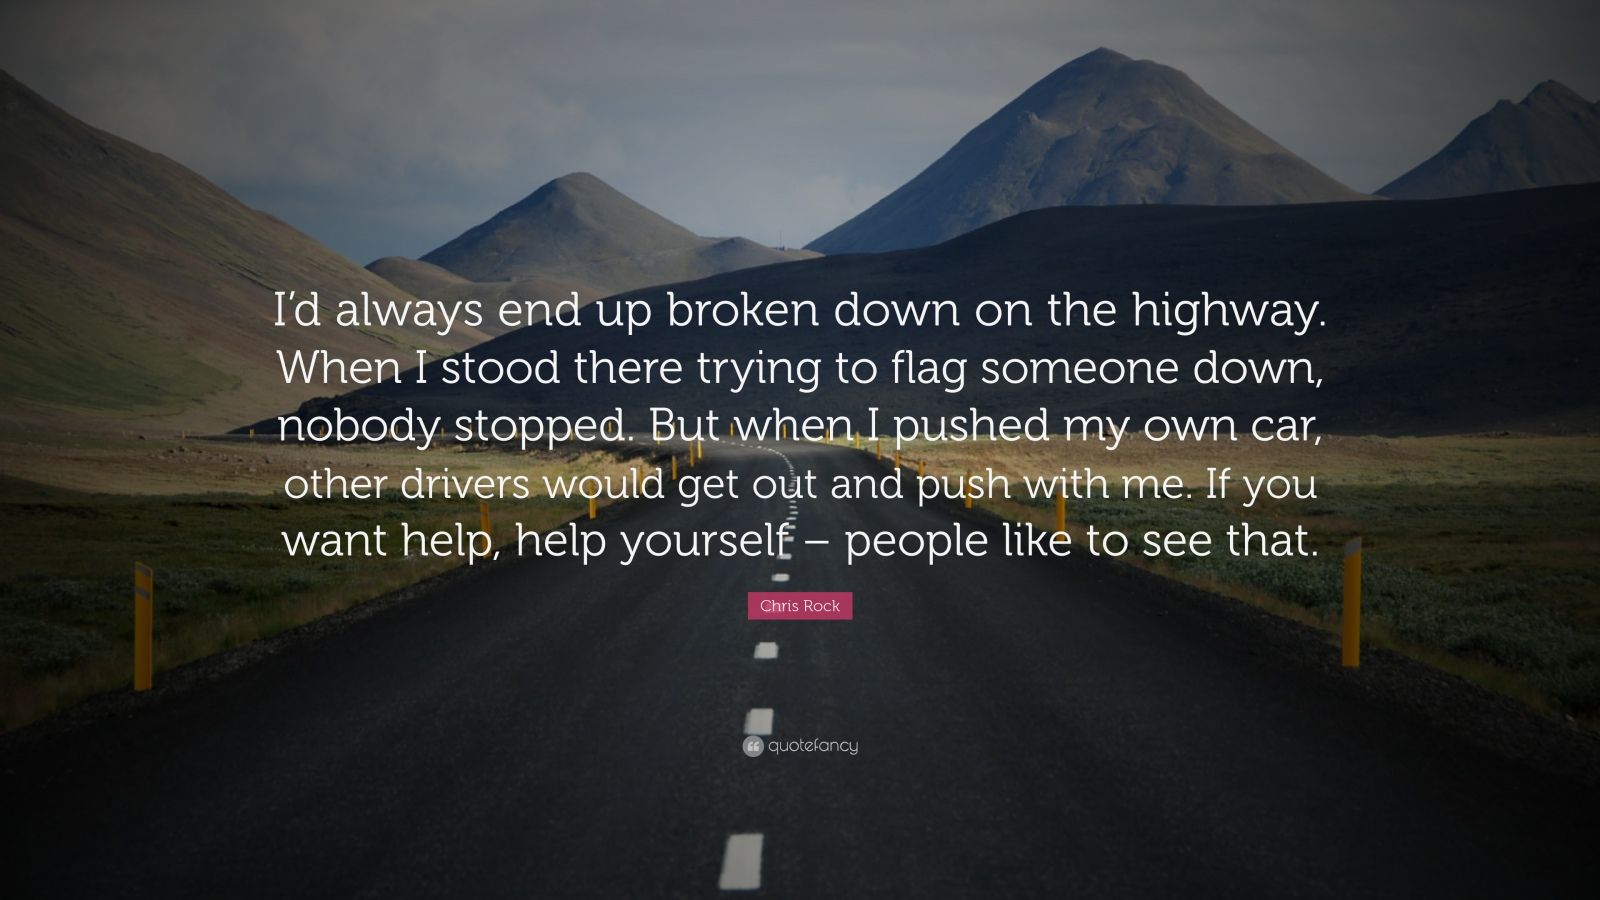 Motivational Quotes “I d always end up broken down on the highway